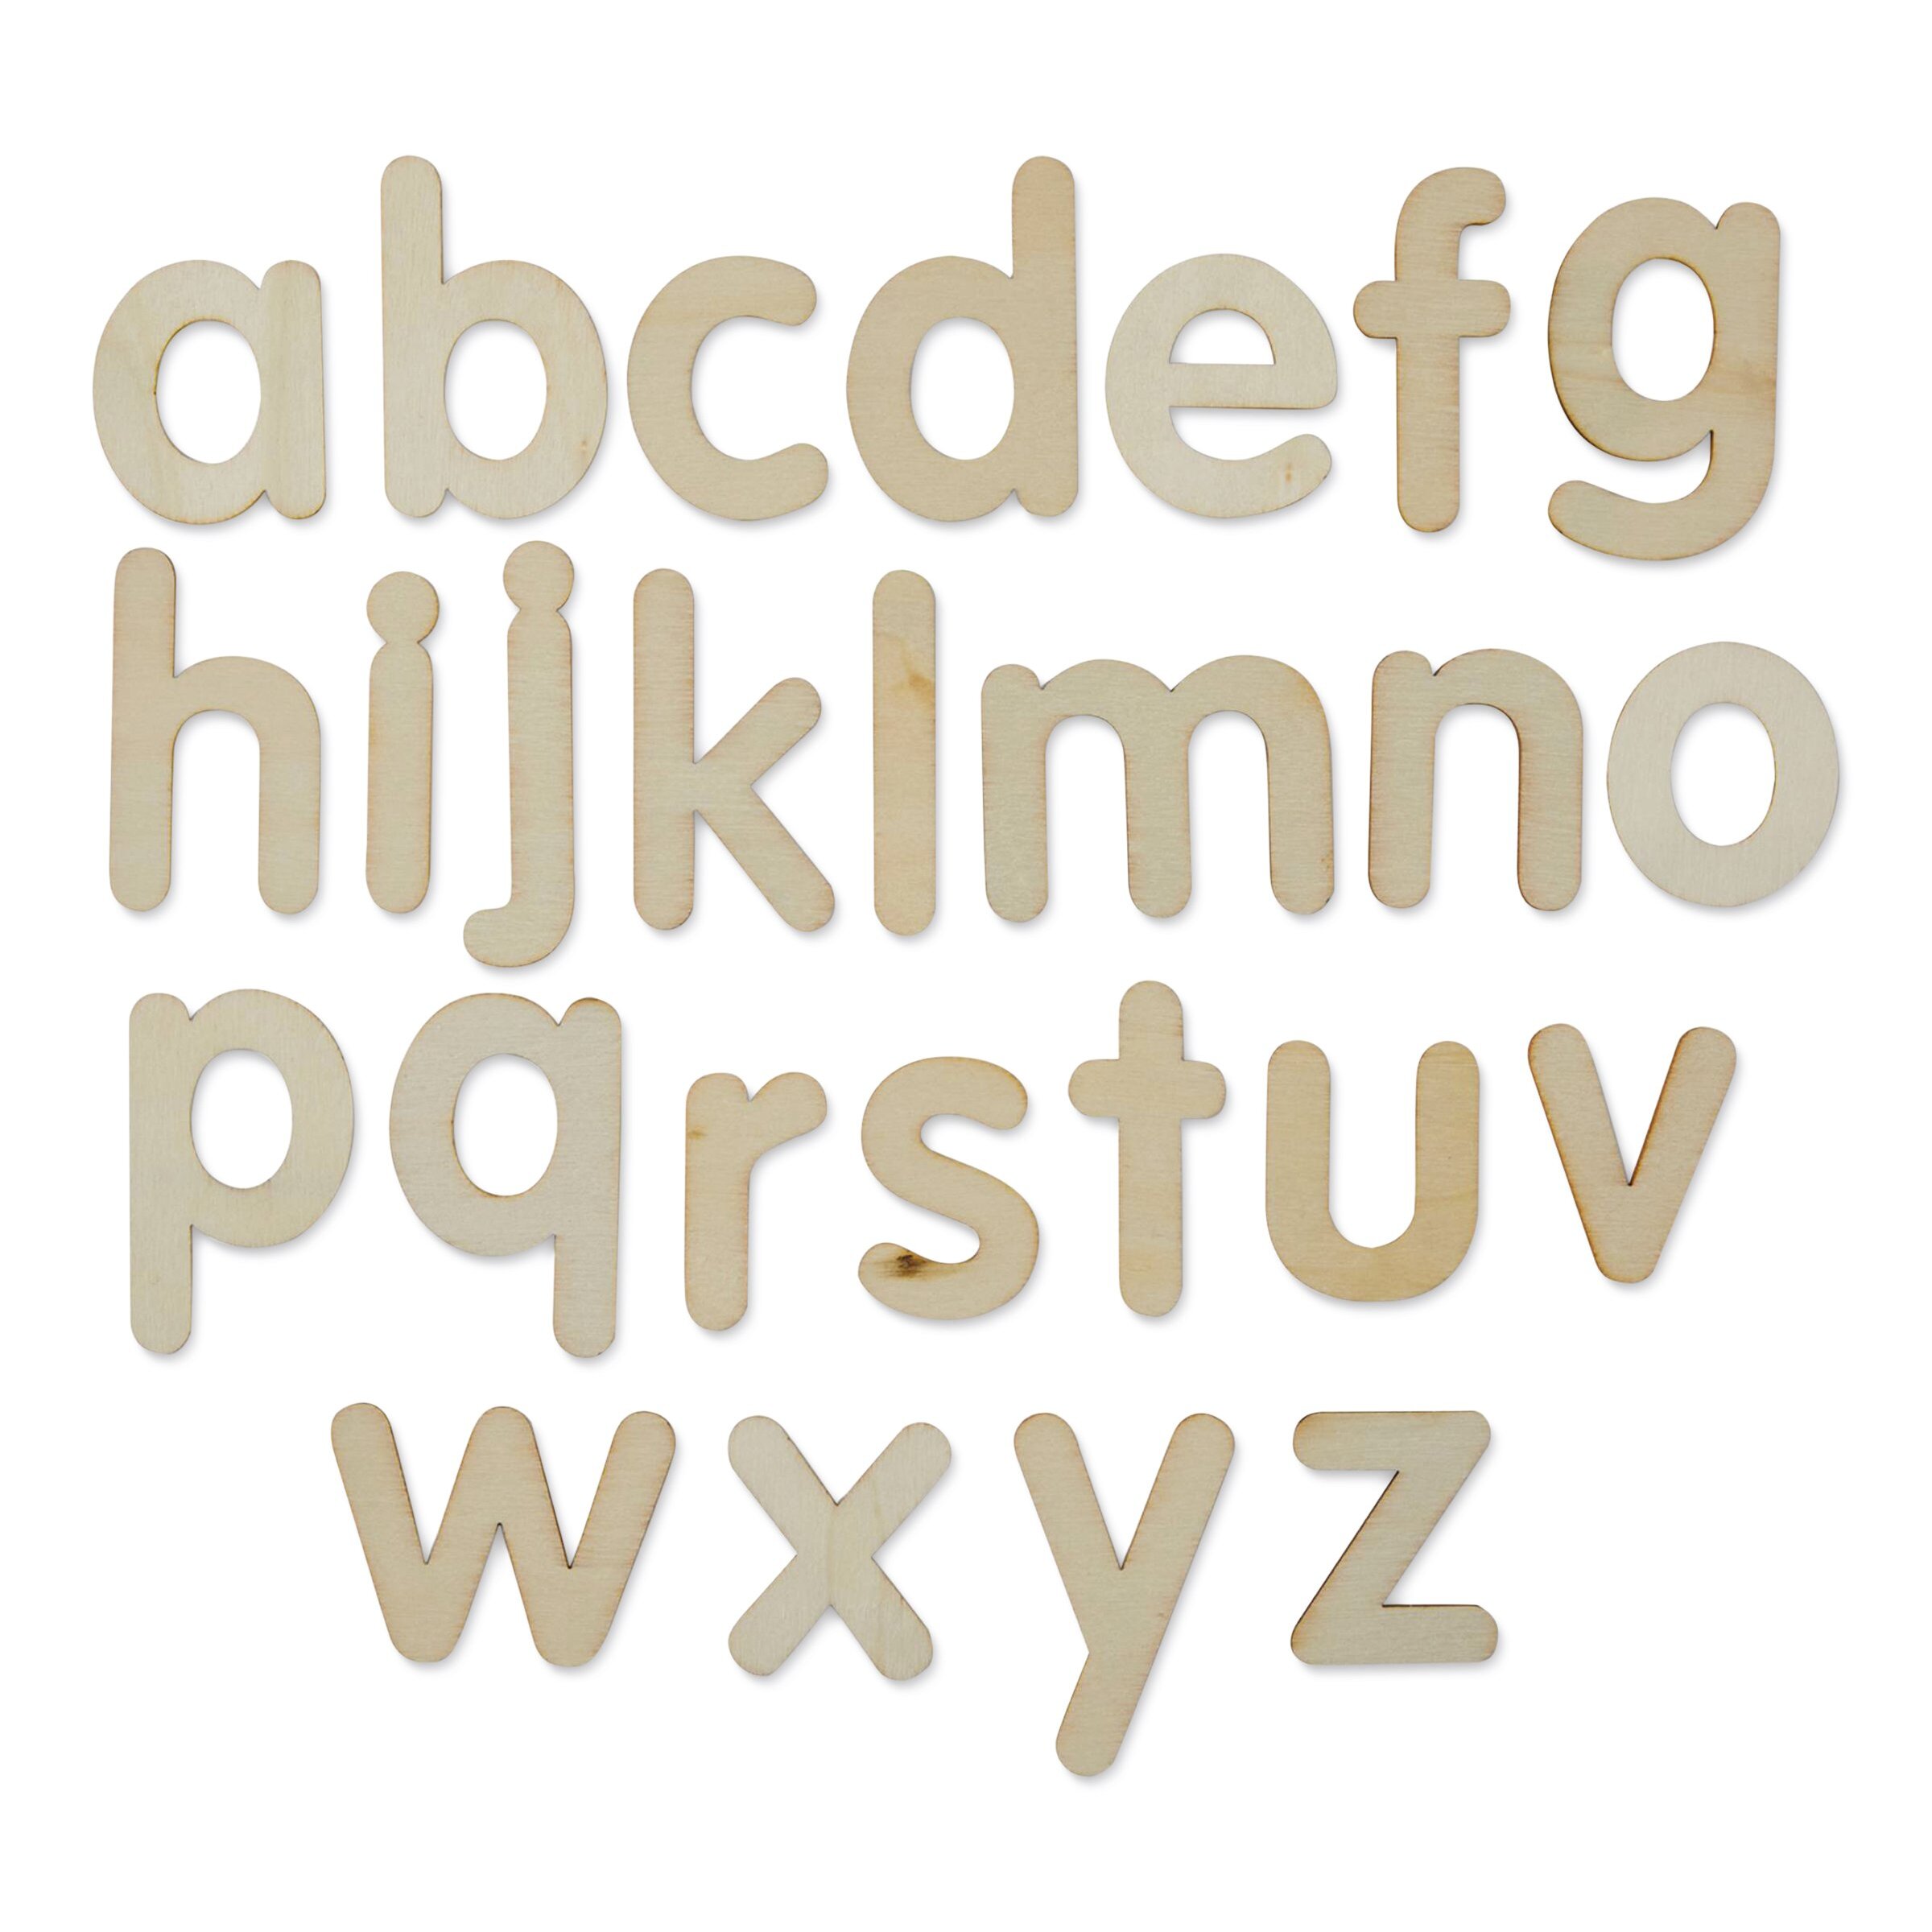 2 Lowercase Classic Serif Letters 26ct by Park Lane